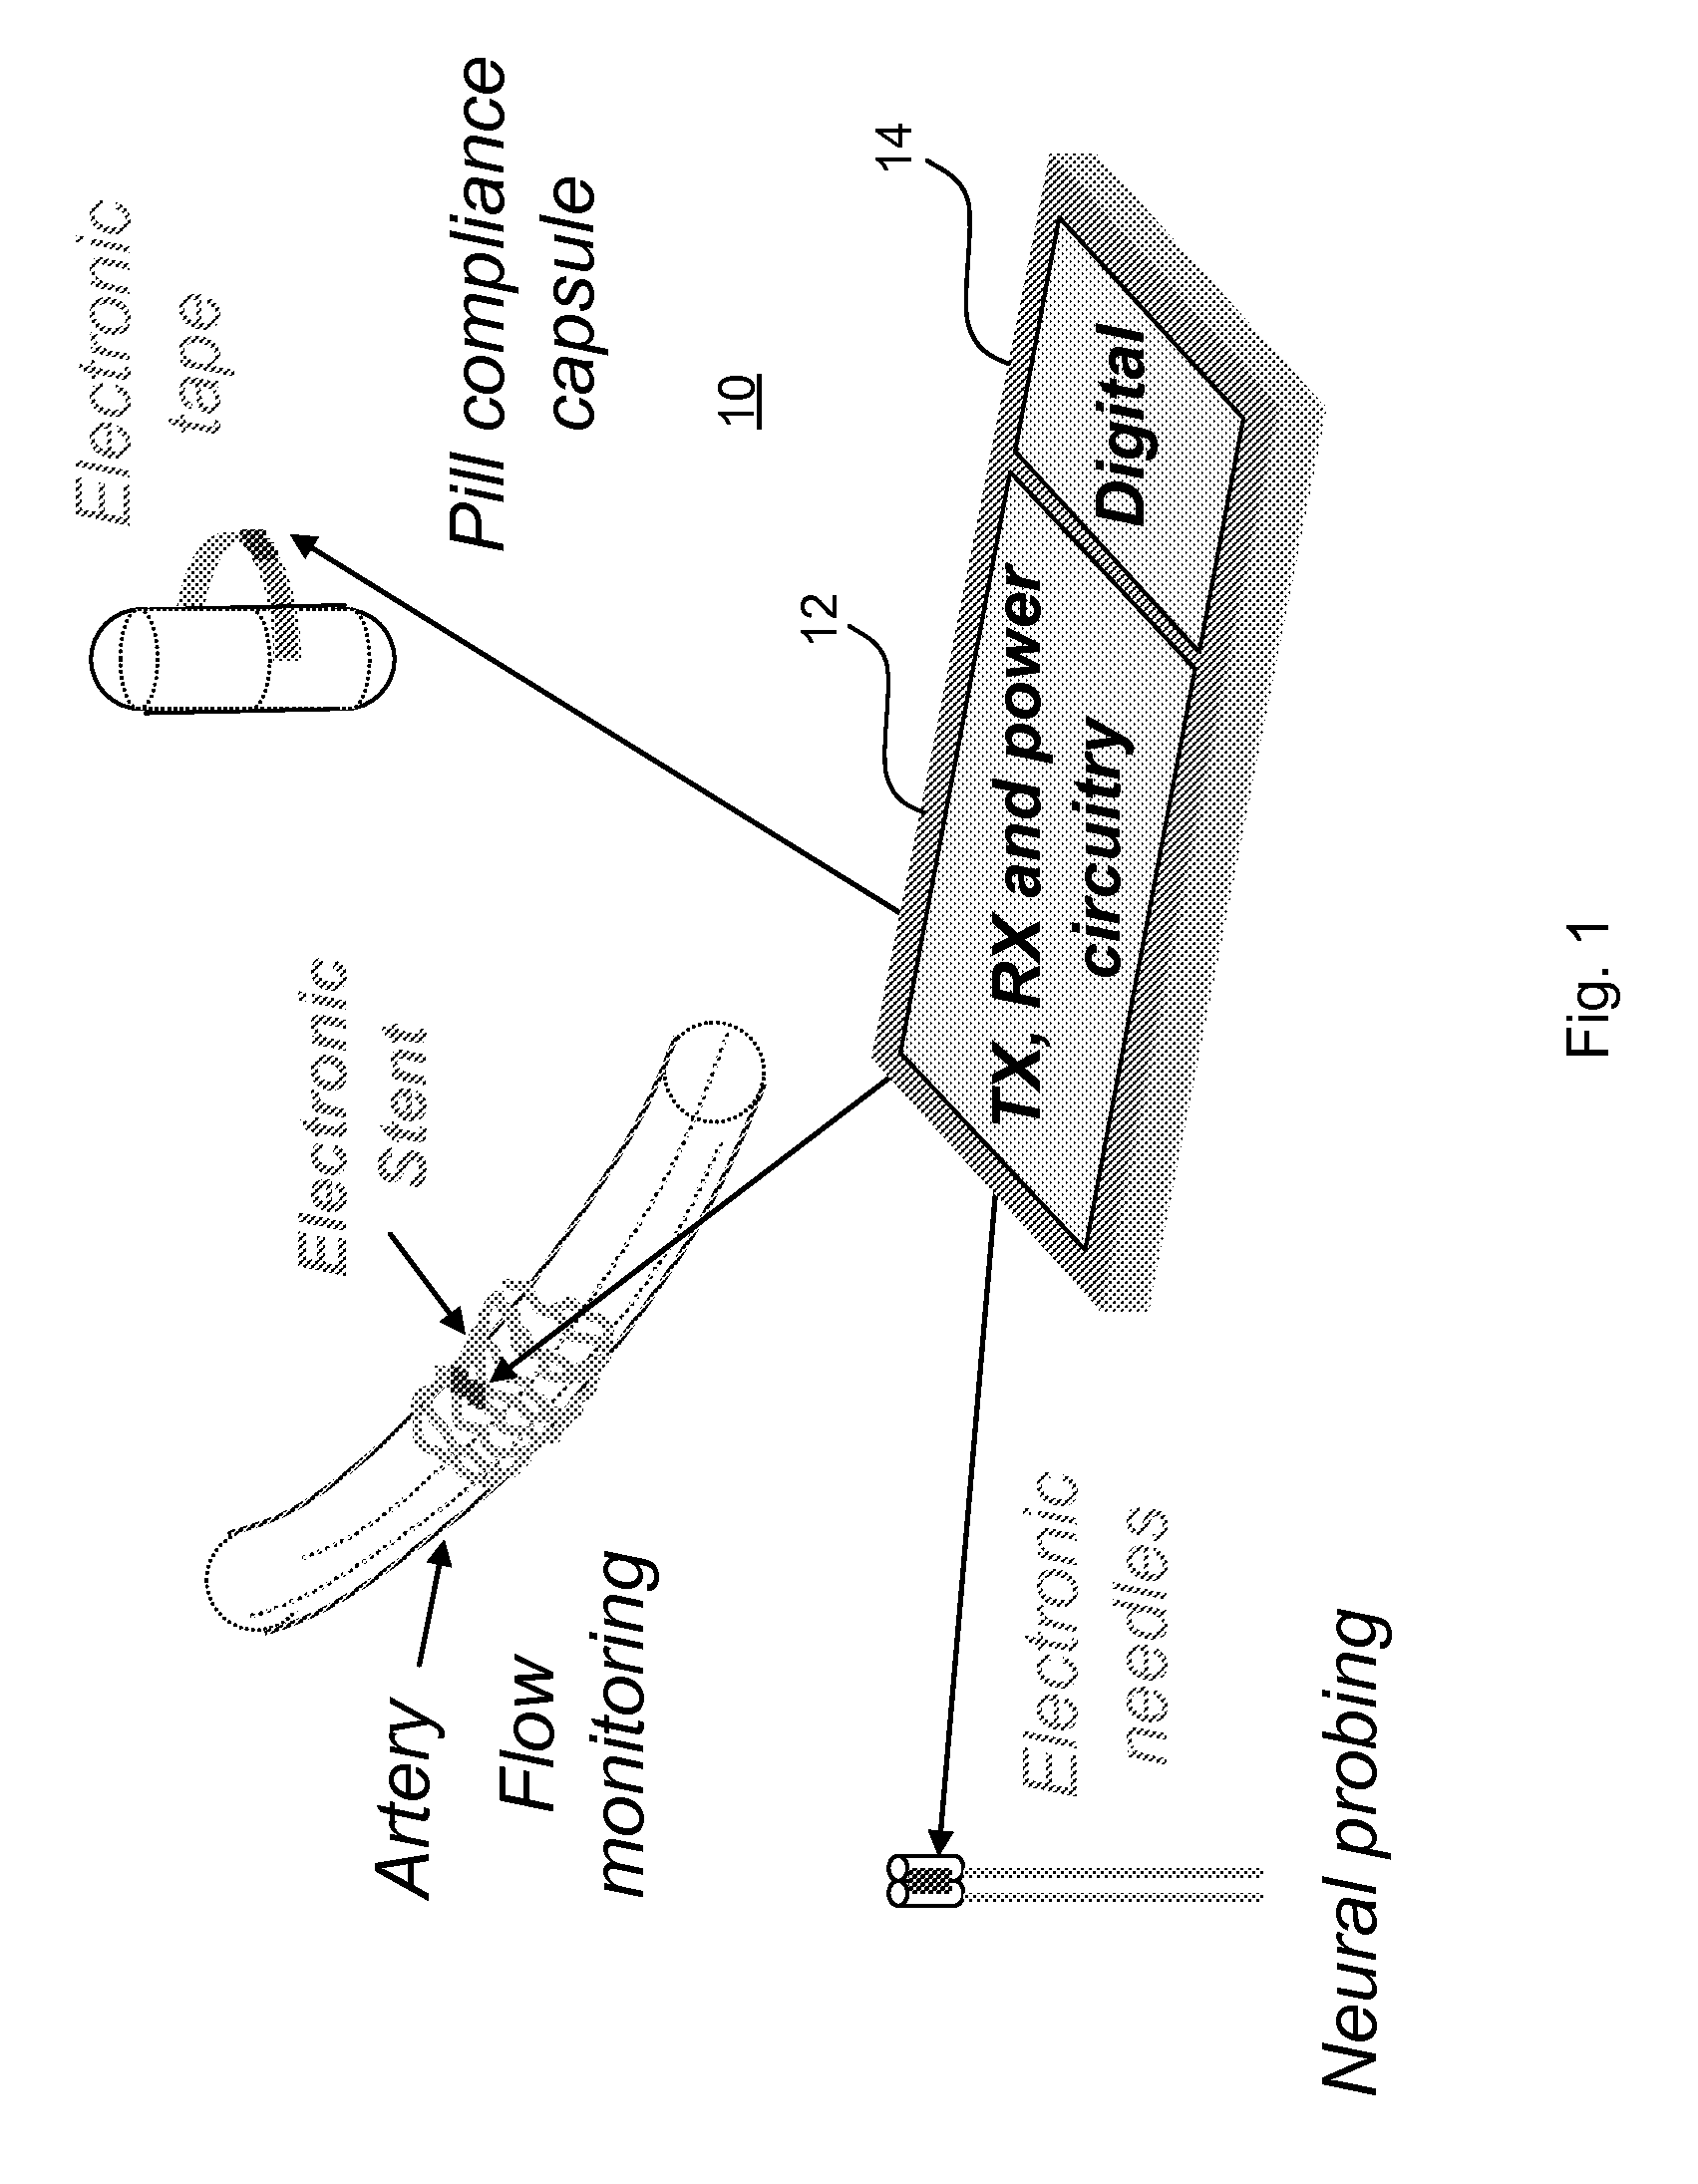 Miniaturized electronic device ingestible by a subject or implantable inside a body of the subject